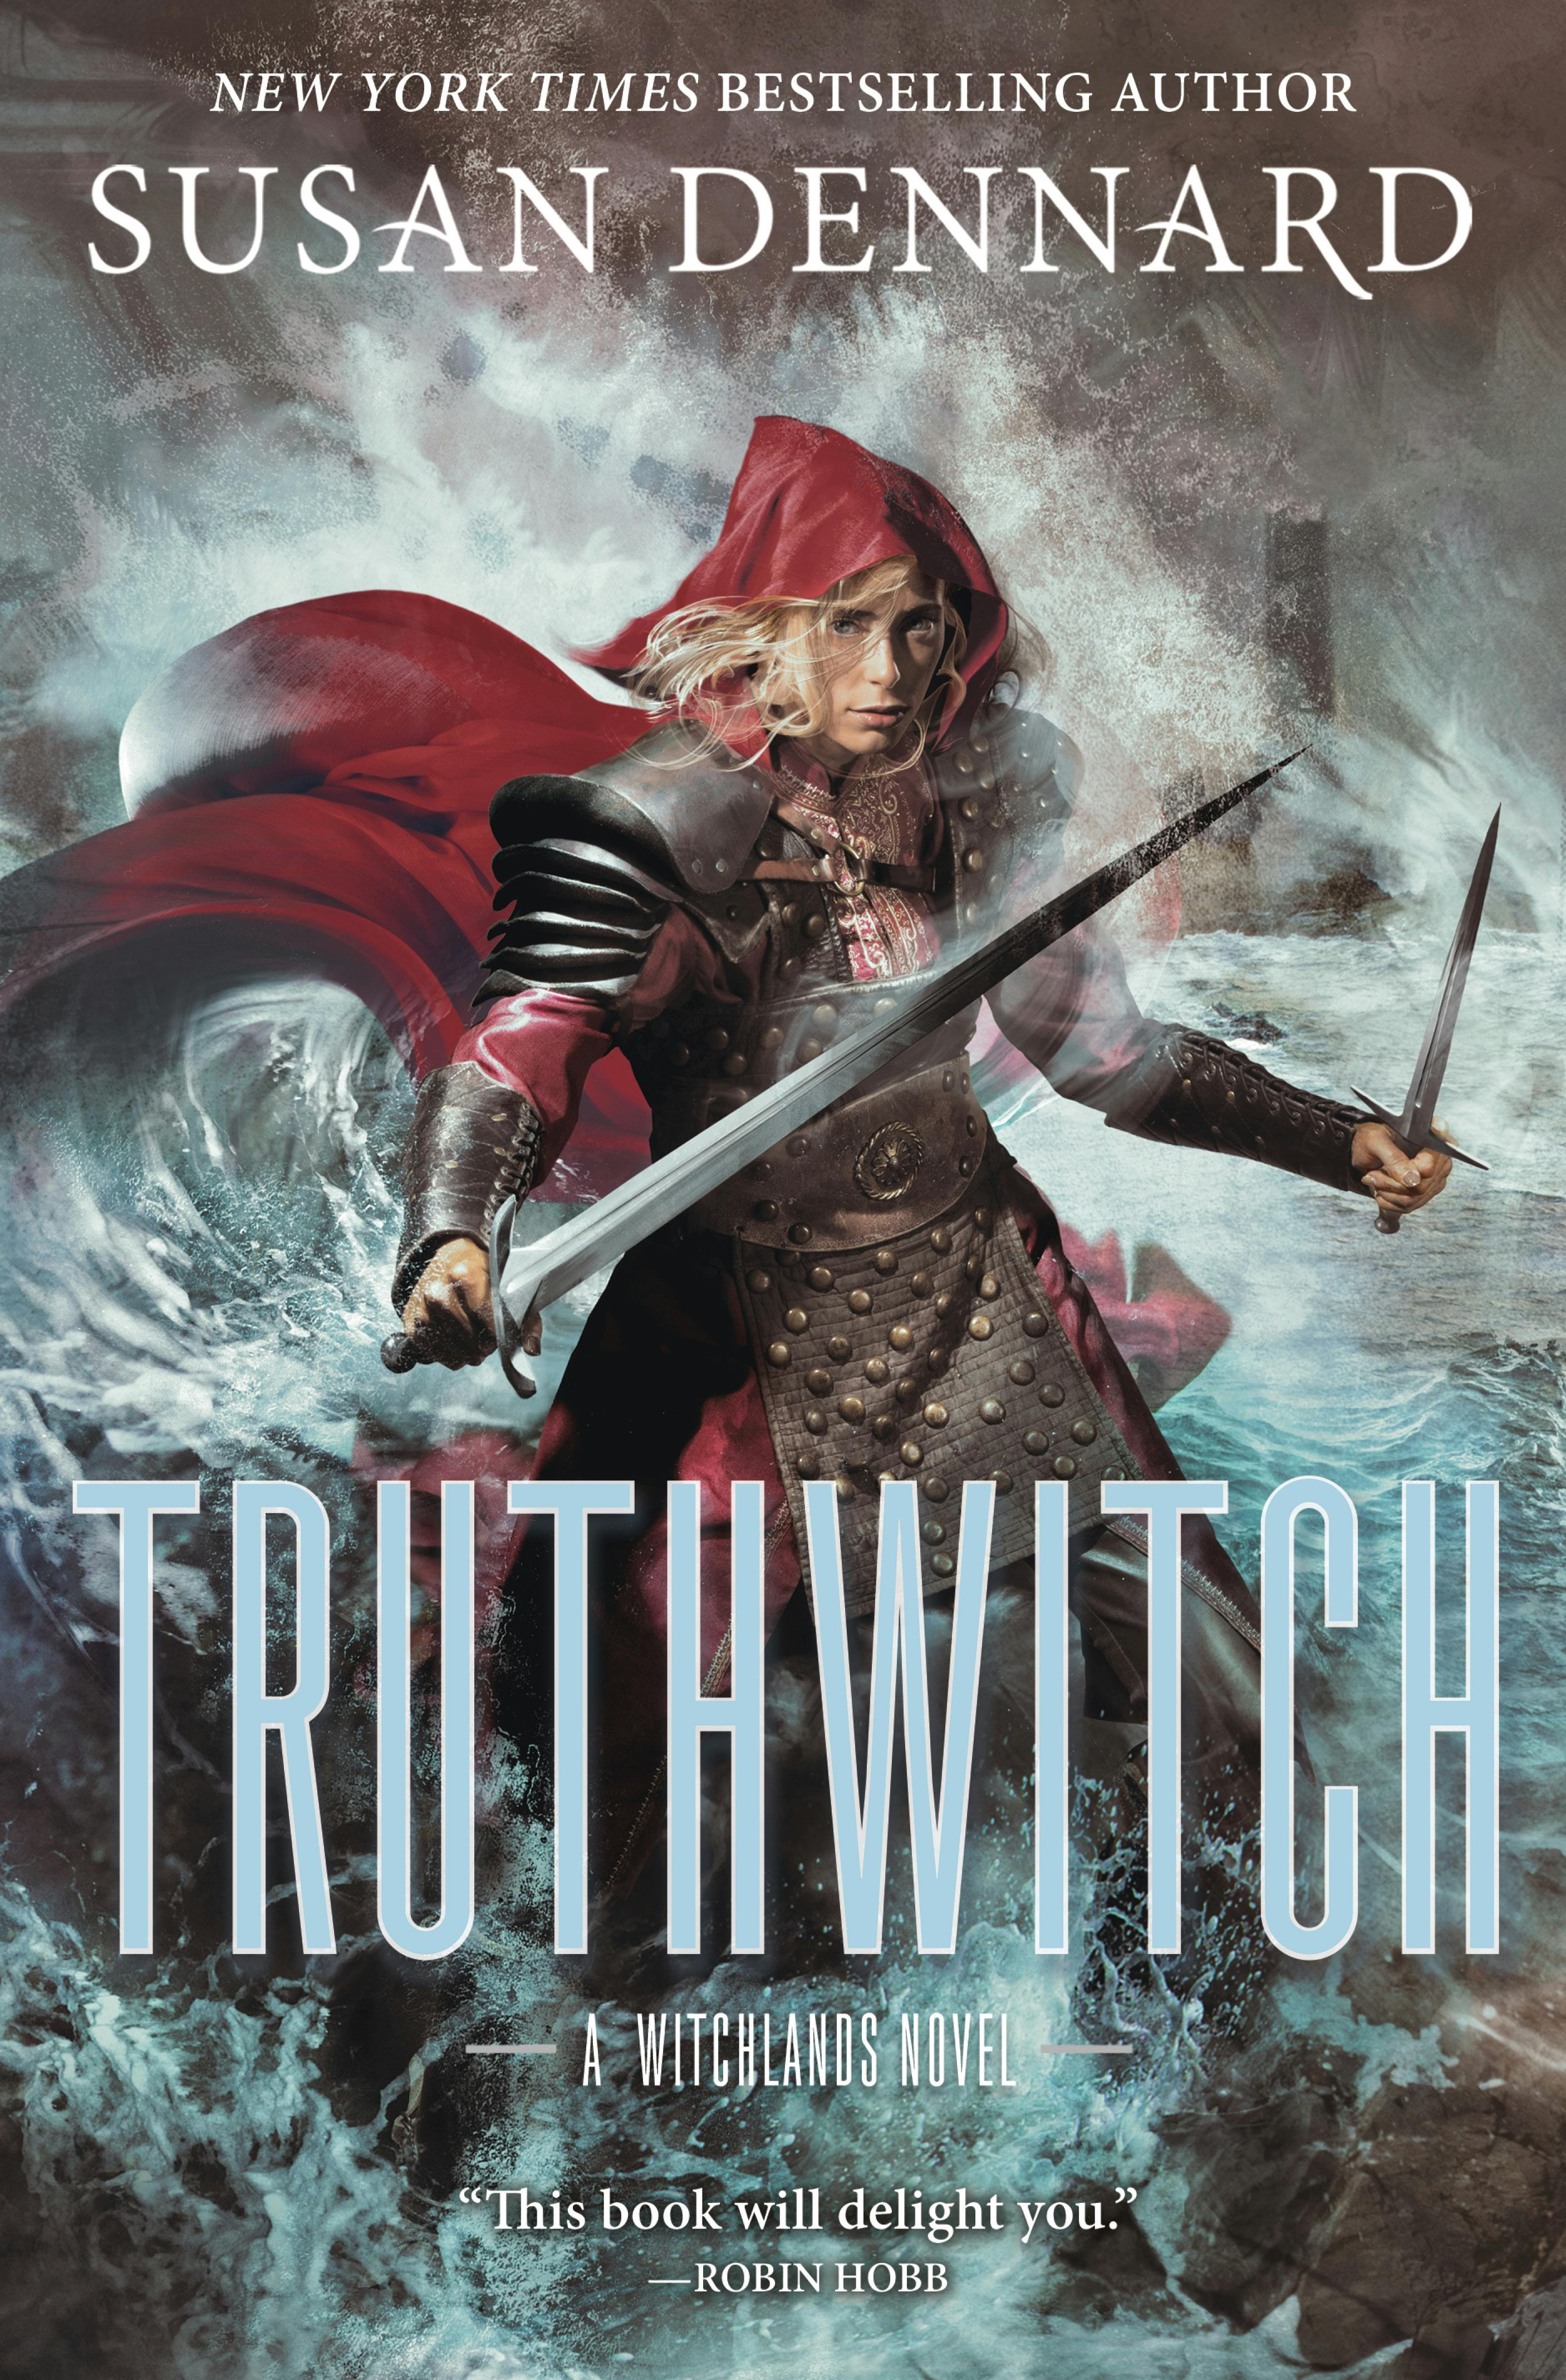 Cover for the book titled as: Truthwitch